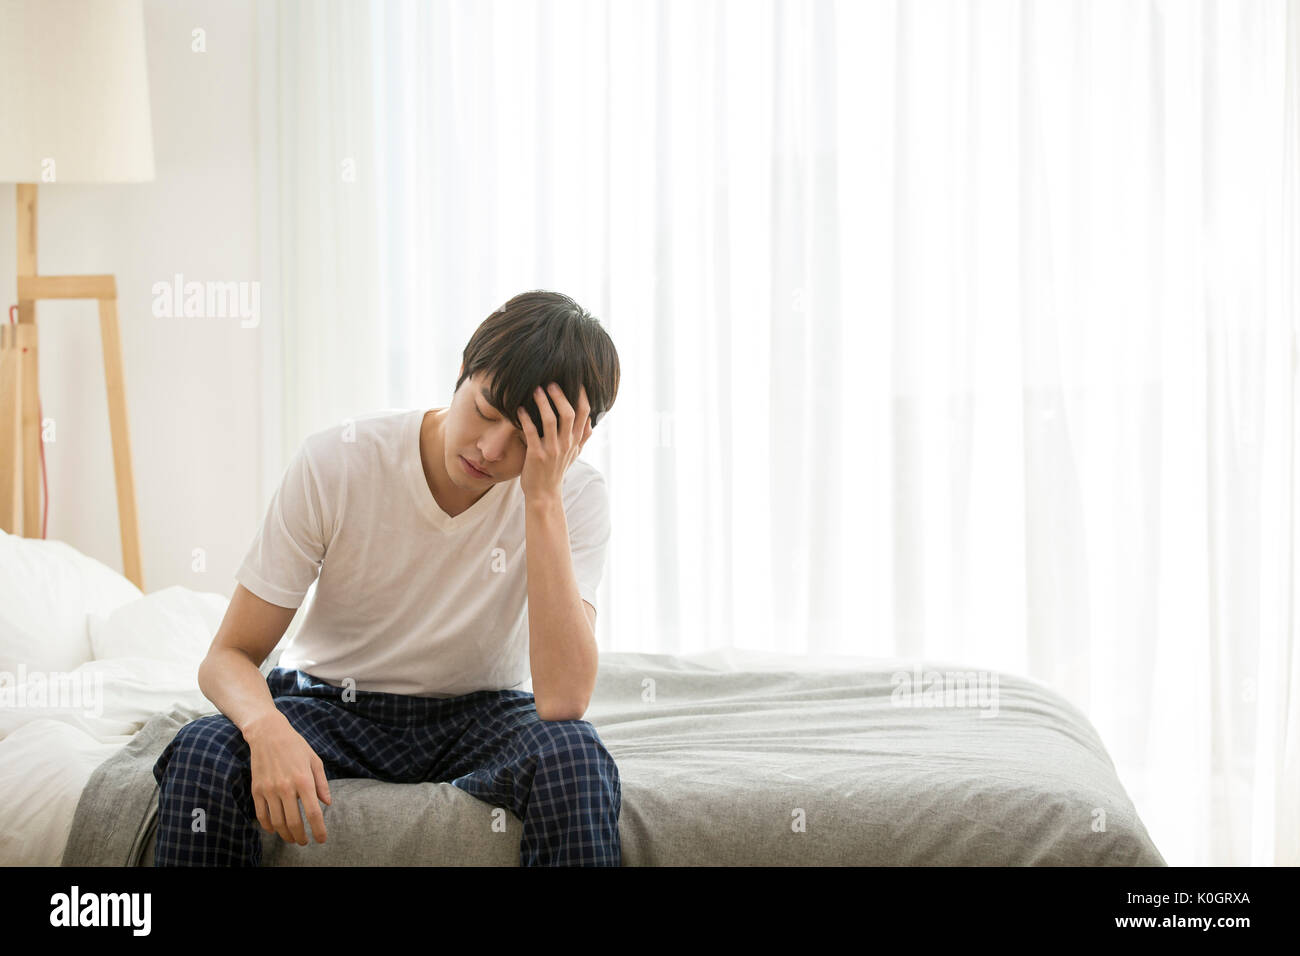 Single man with headache sitting on bed Stock Photo